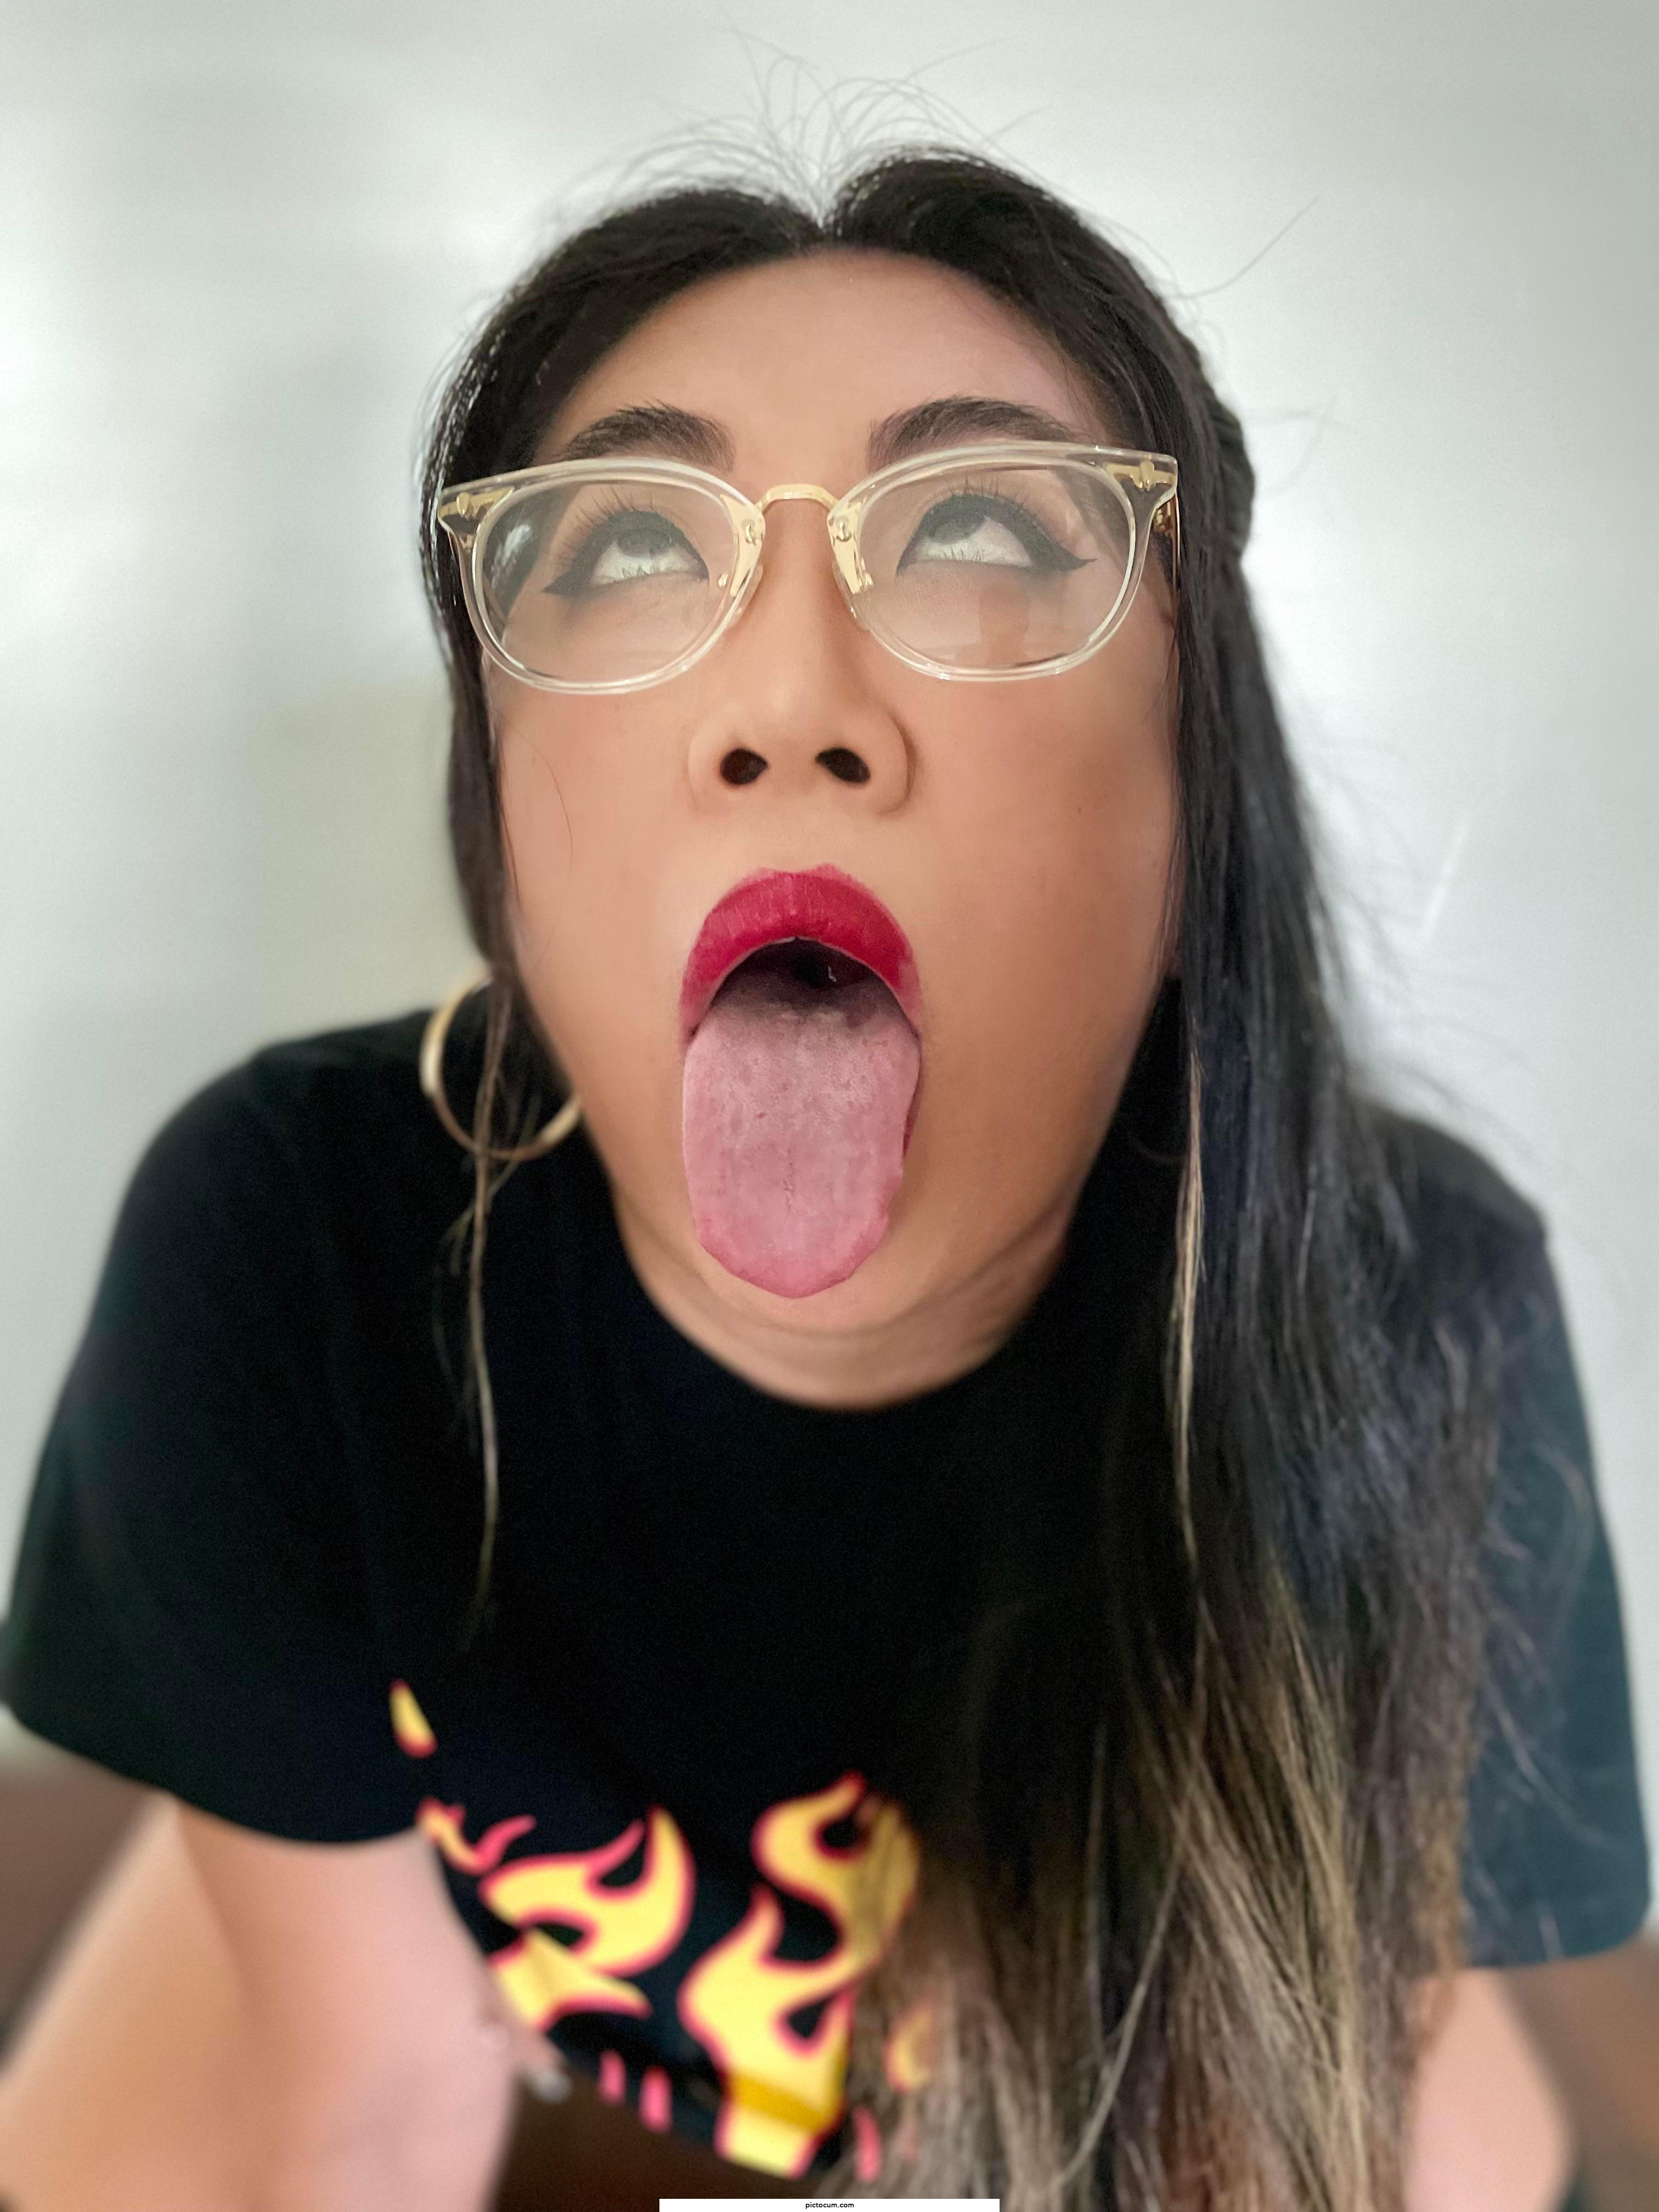  a mature woman trying an ahegao …. Any guidance if you liked it? 🙈